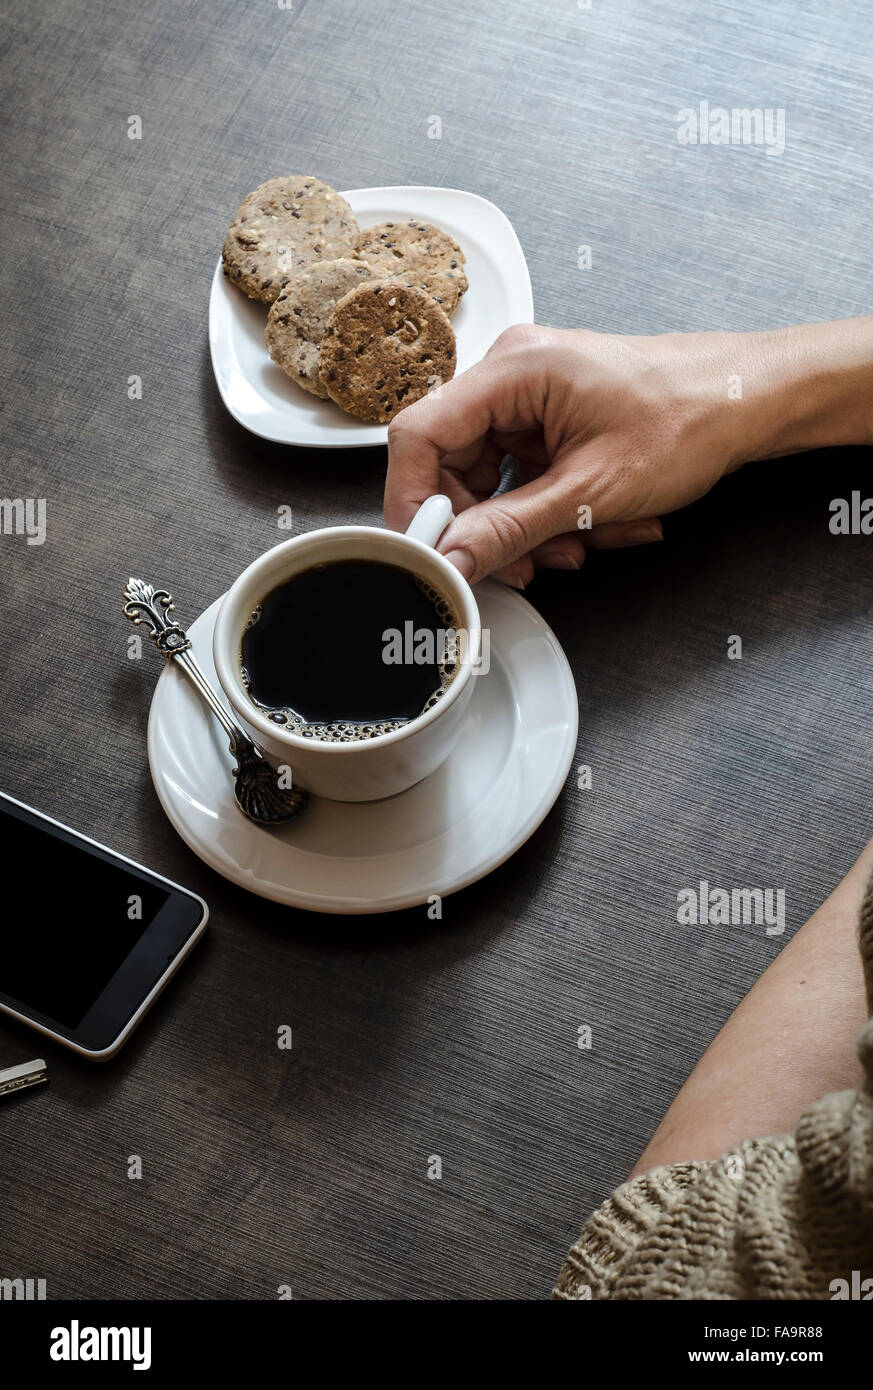 Closeup of woman's hand holding a cup of coffee Banque D'Images